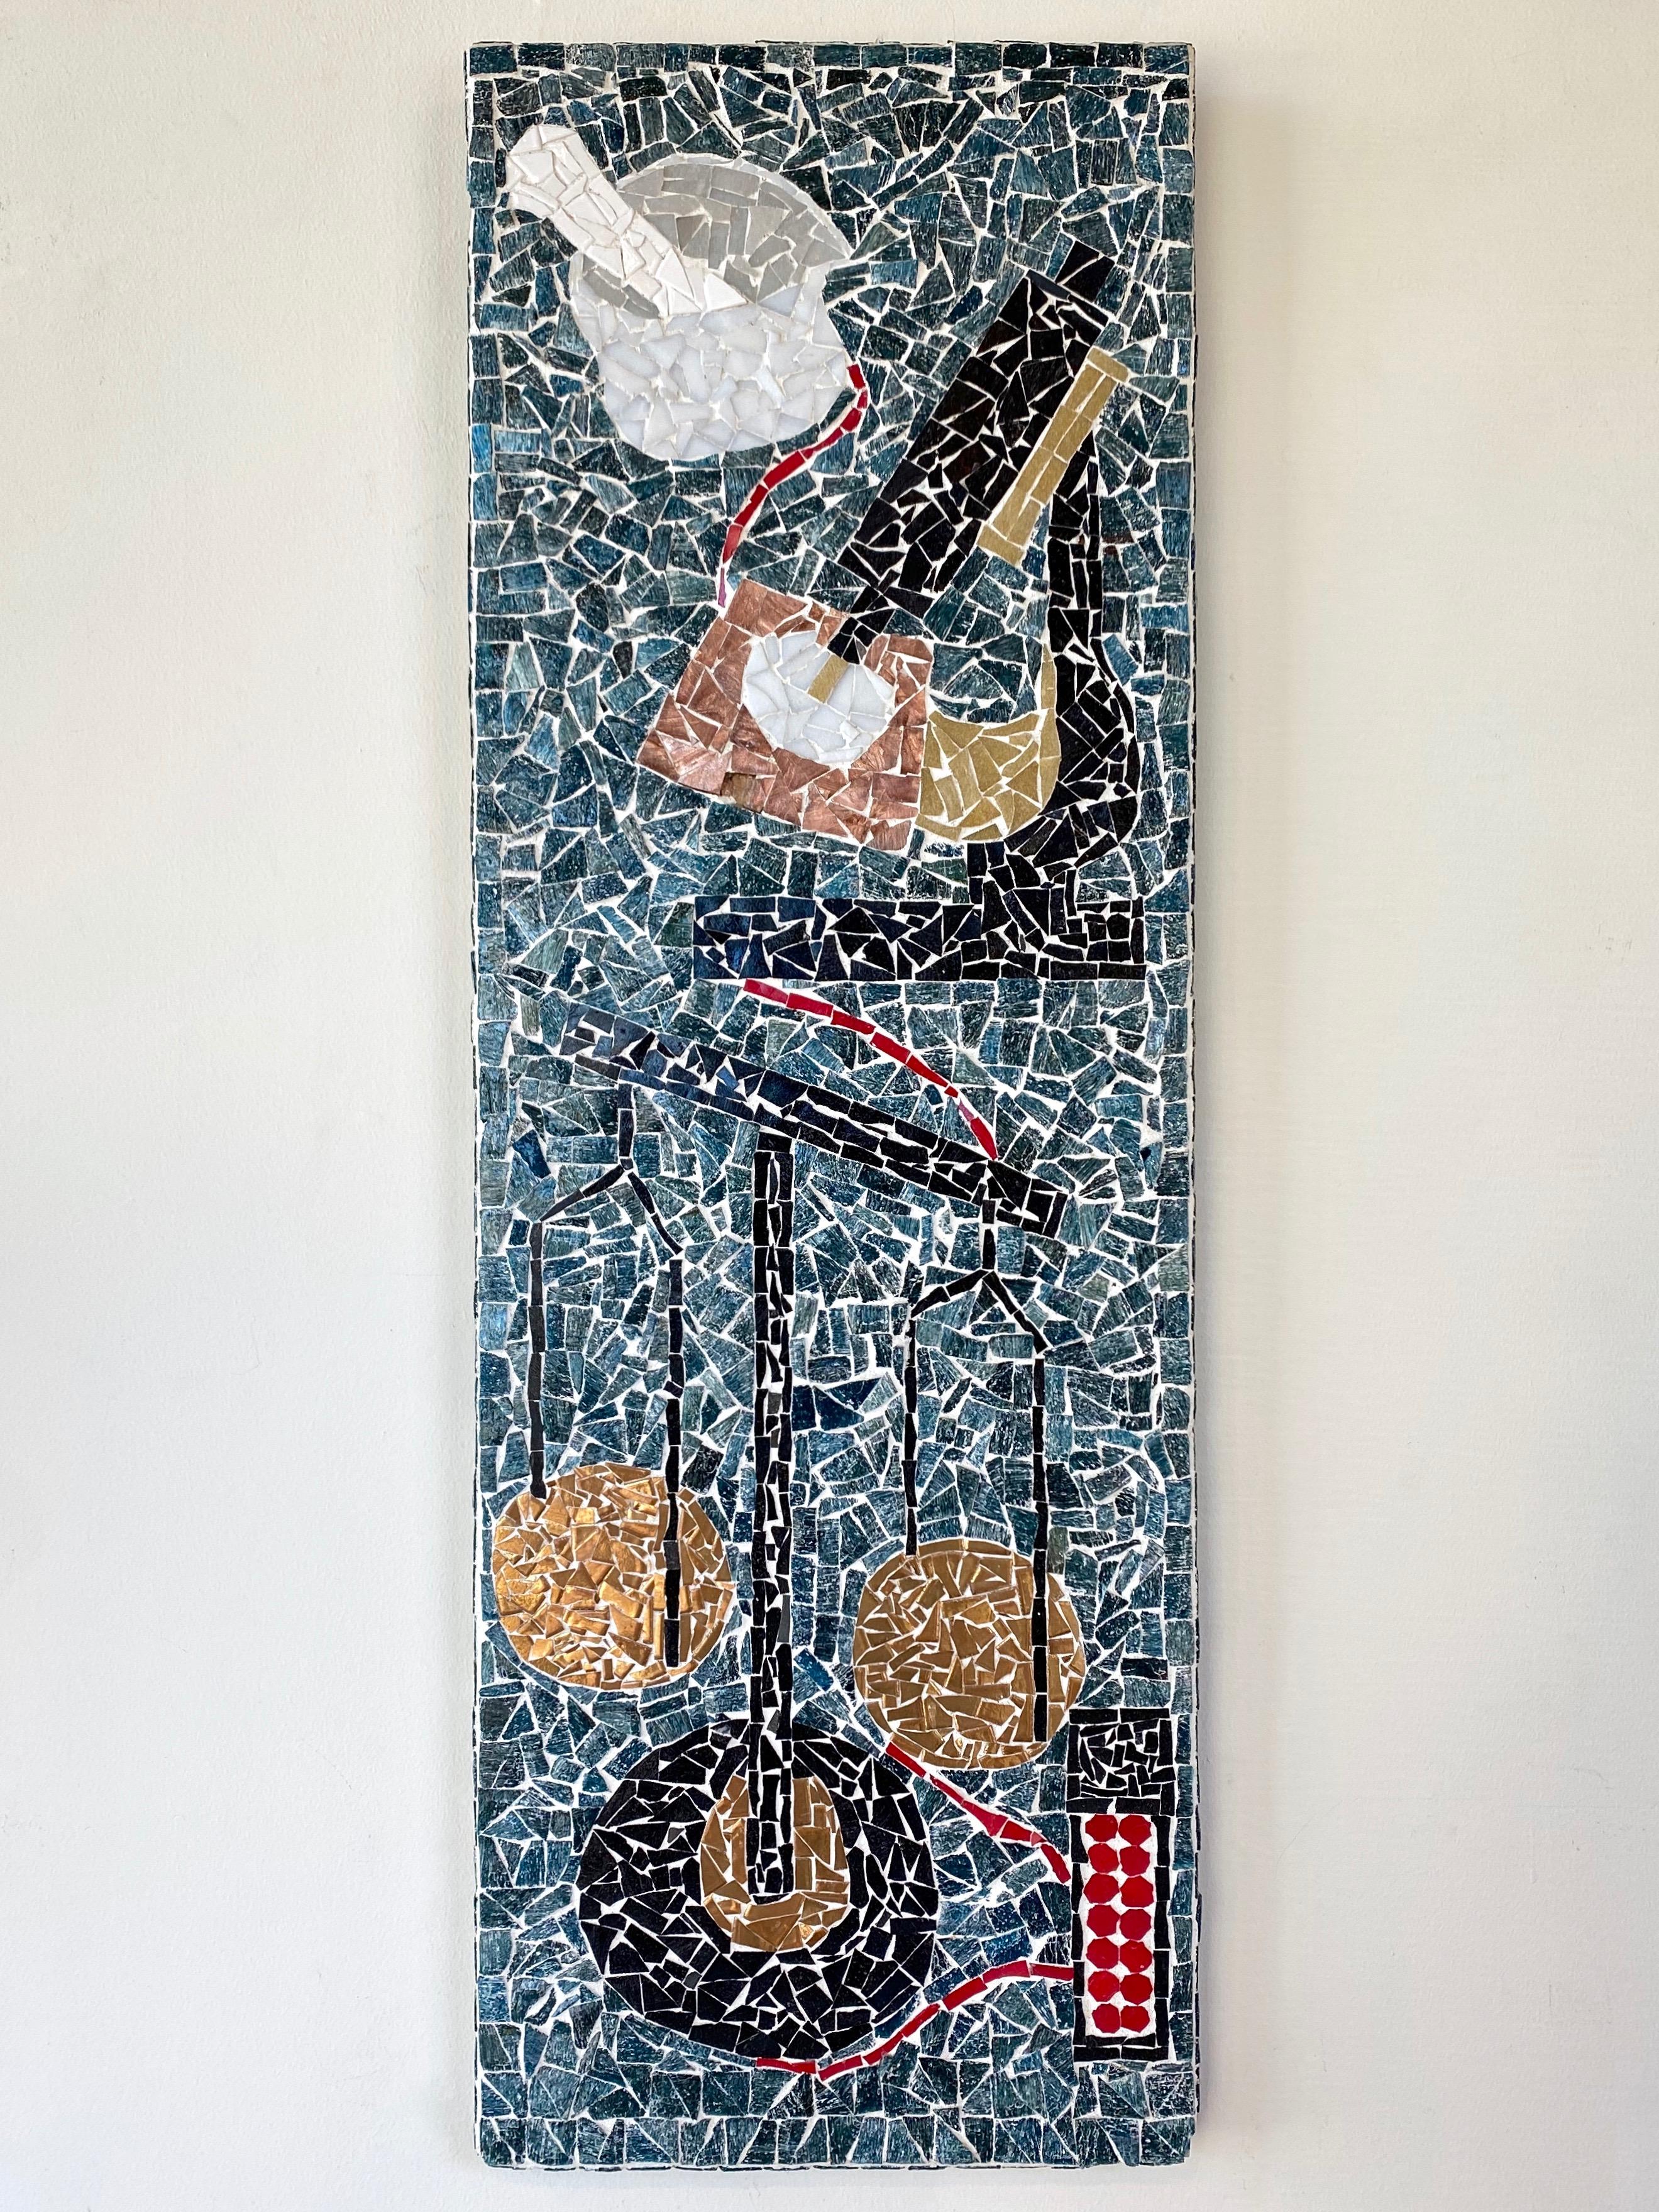 A wonderfully executed and unique 1950s tall glass tile mosaic illustrating the pill making process, perfect for the wall of an apothecarist, pharmacist, or physician.

Great mid-century modern aesthetic, with countless pieces of exactingly placed